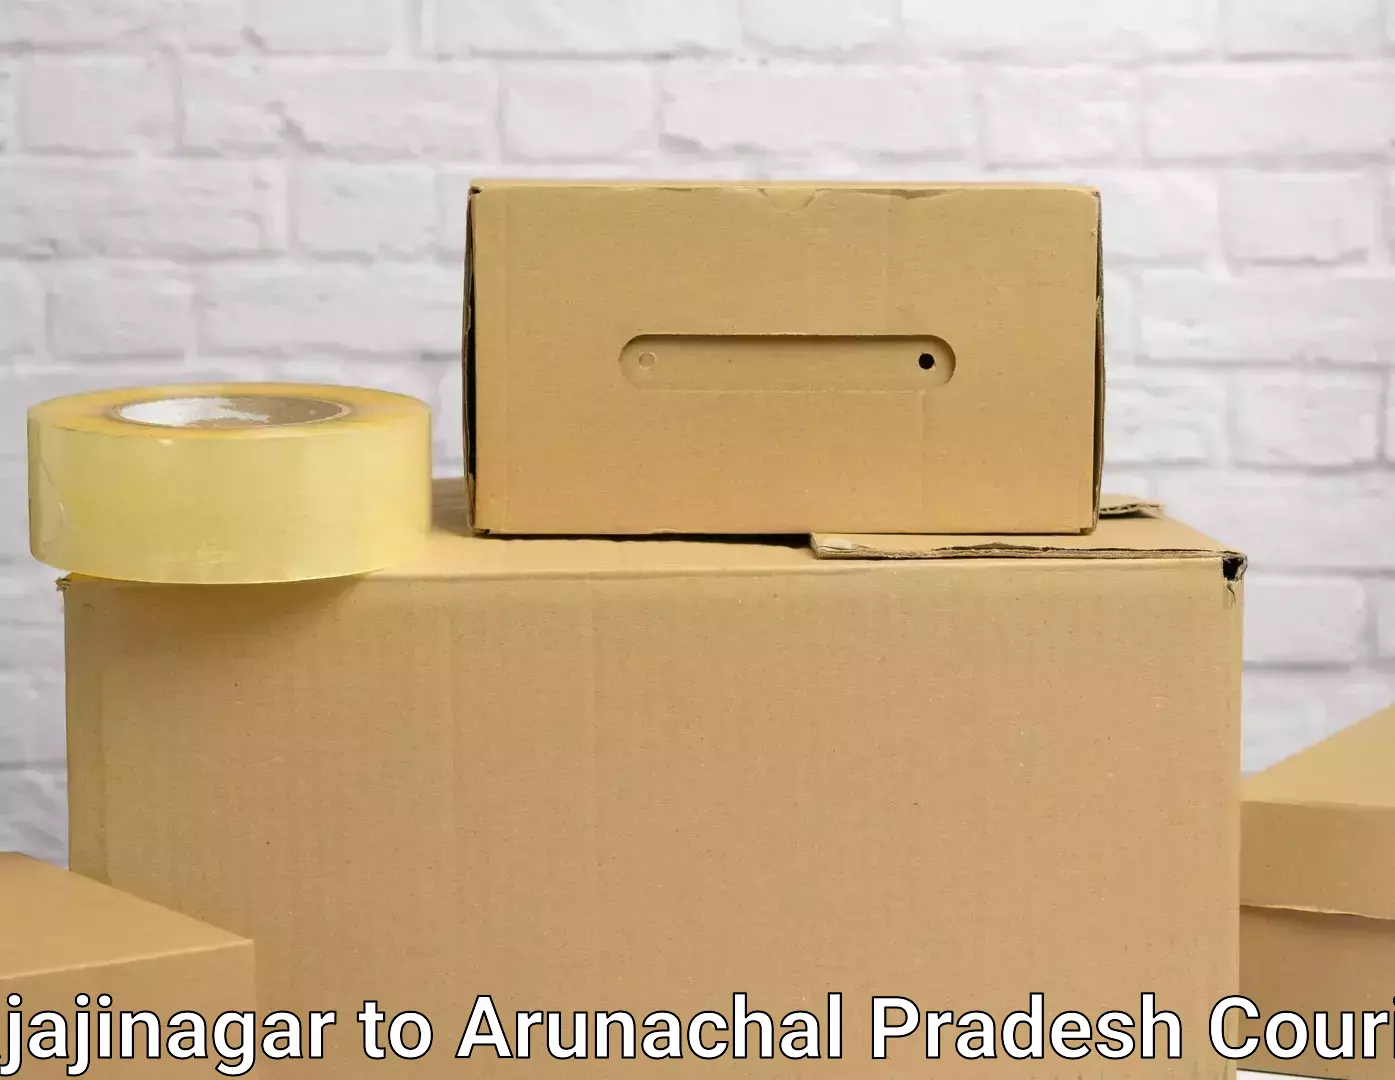 Furniture delivery service in Rajajinagar to Upper Siang